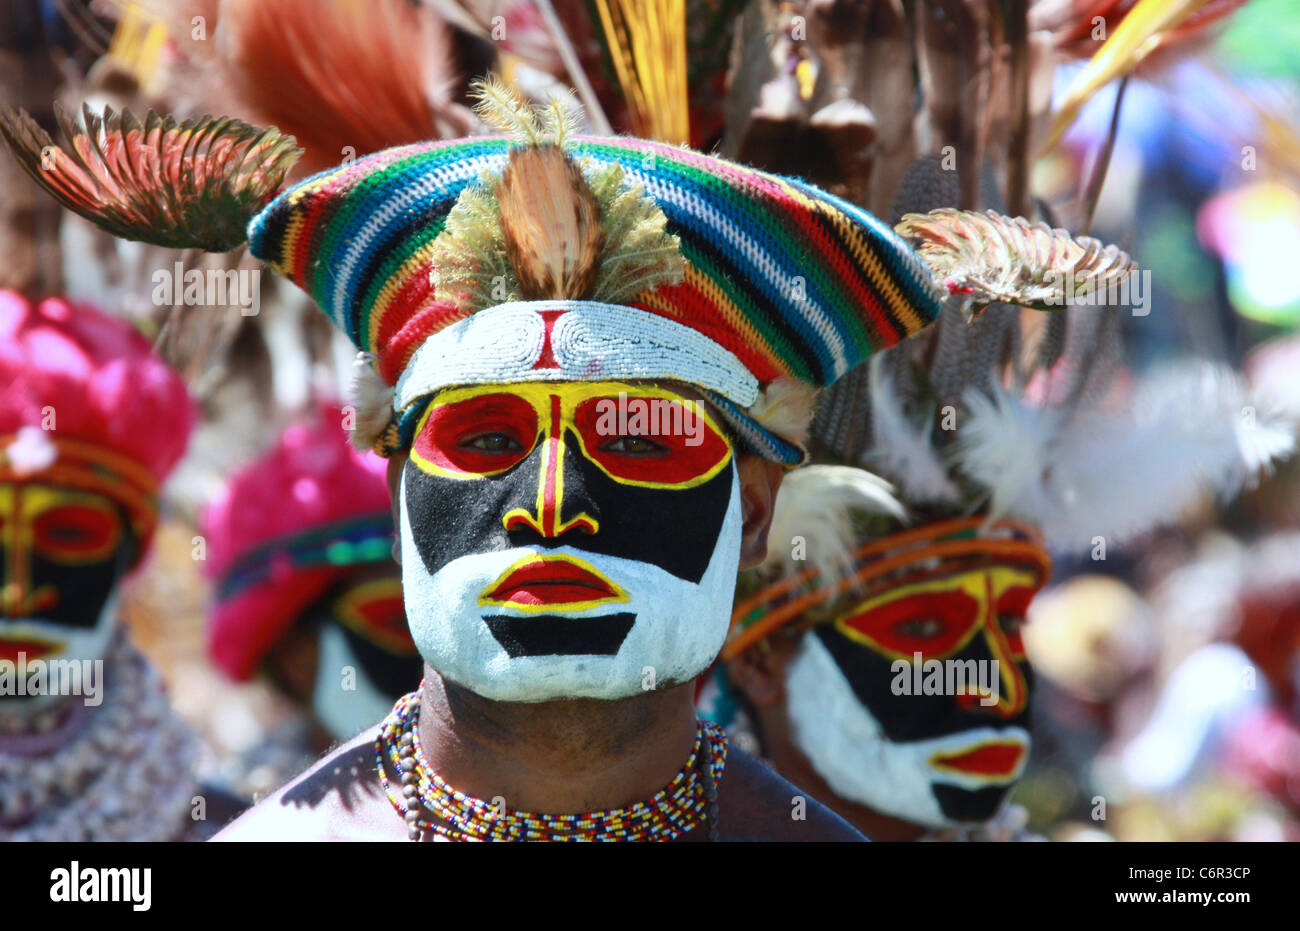 Tribal People at the Mount Hagen Cultural Show 2010 in Papua New Guinea Stock Photo